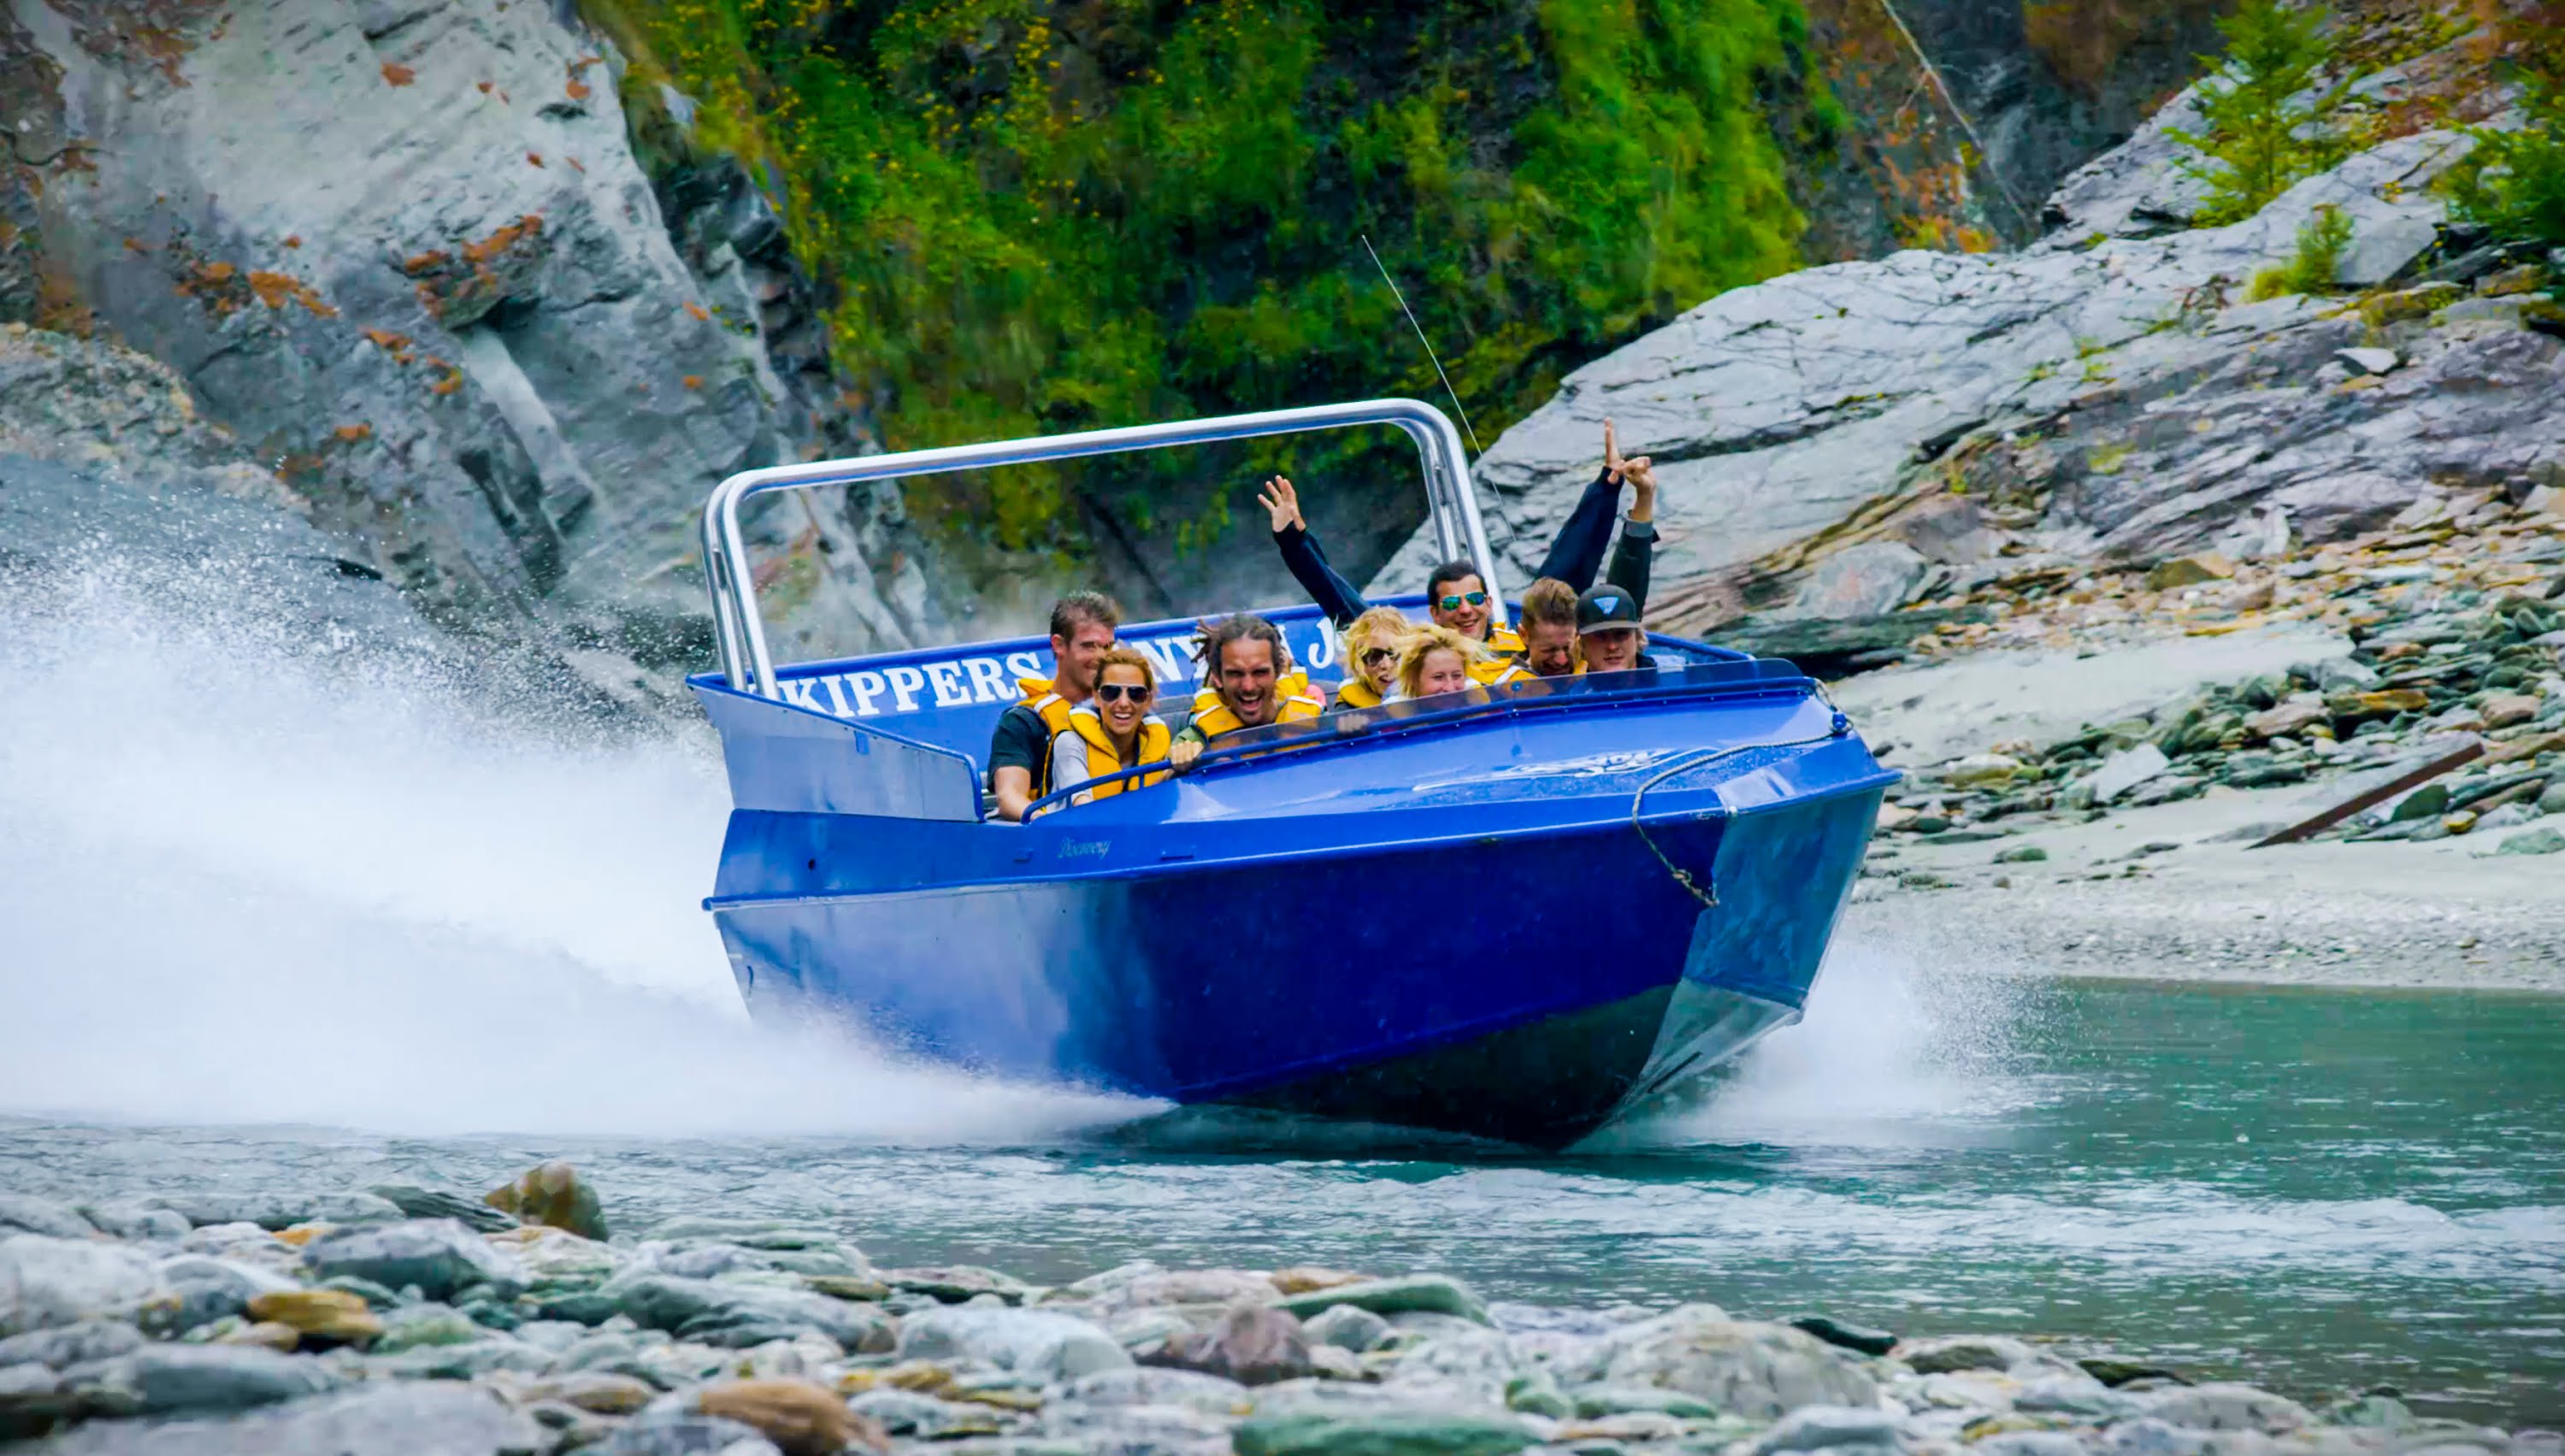 Jet Engine Strapped to Boat - Jetboating in New Zealand! Play On! in ...